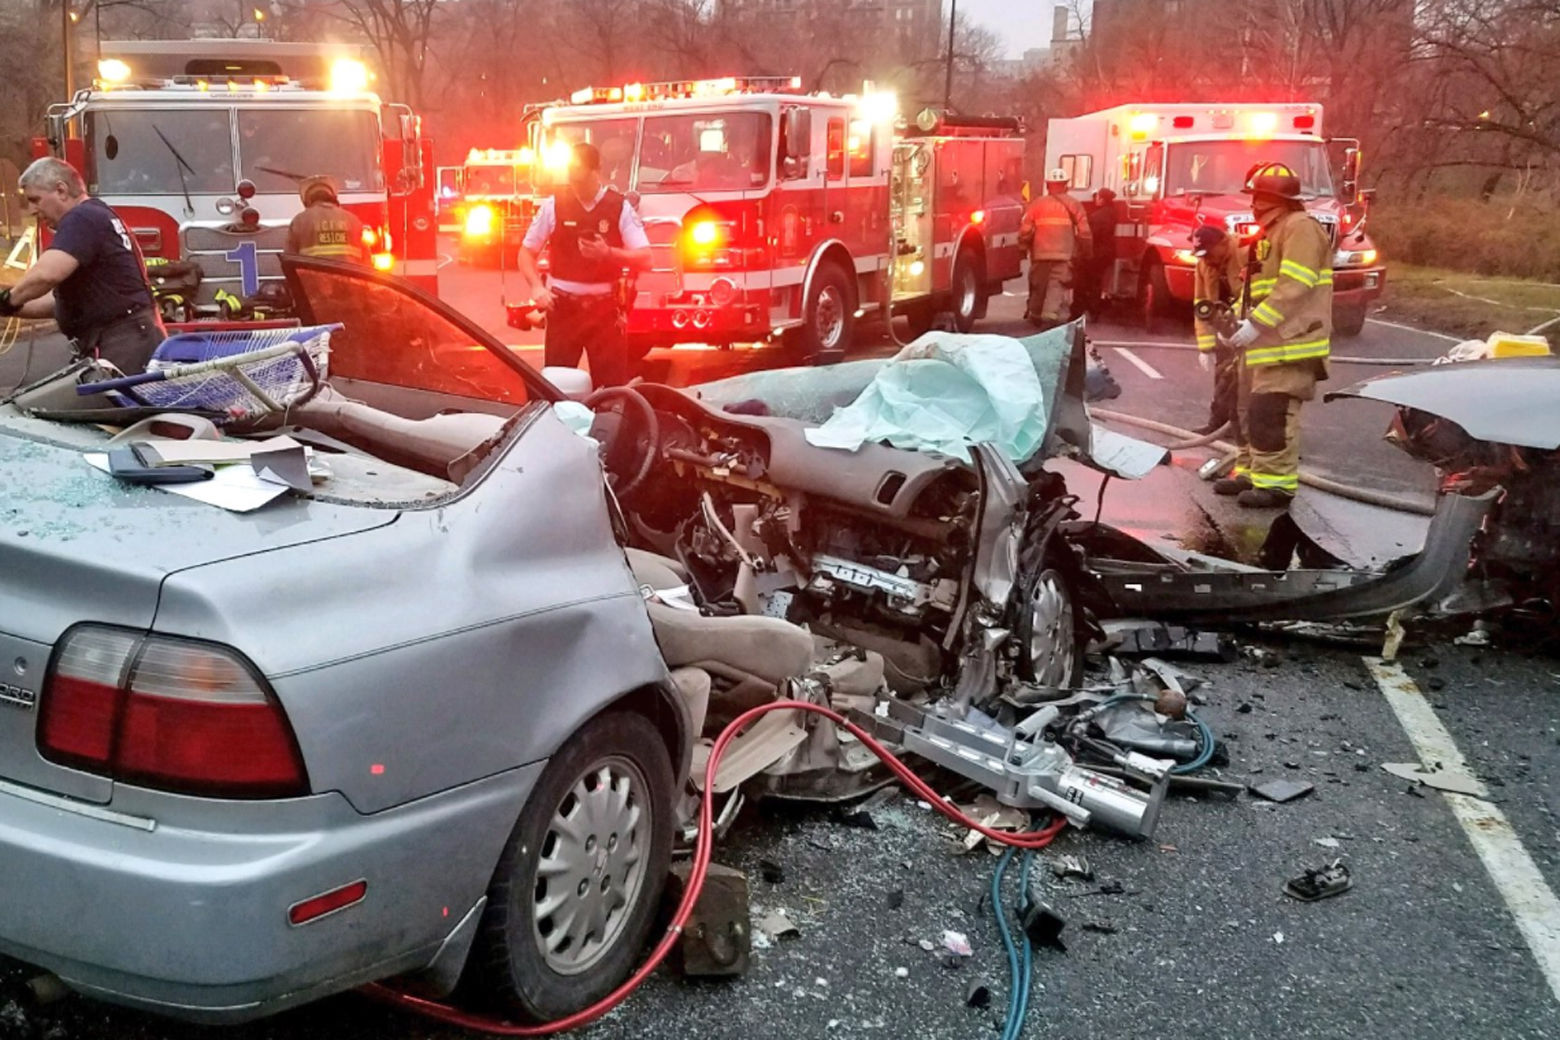 D.C. Fire and EMS at the scene of a serious crash Thursday morning on Rock Creek Parkway. (Courtesy D.C. Fire and EMS)